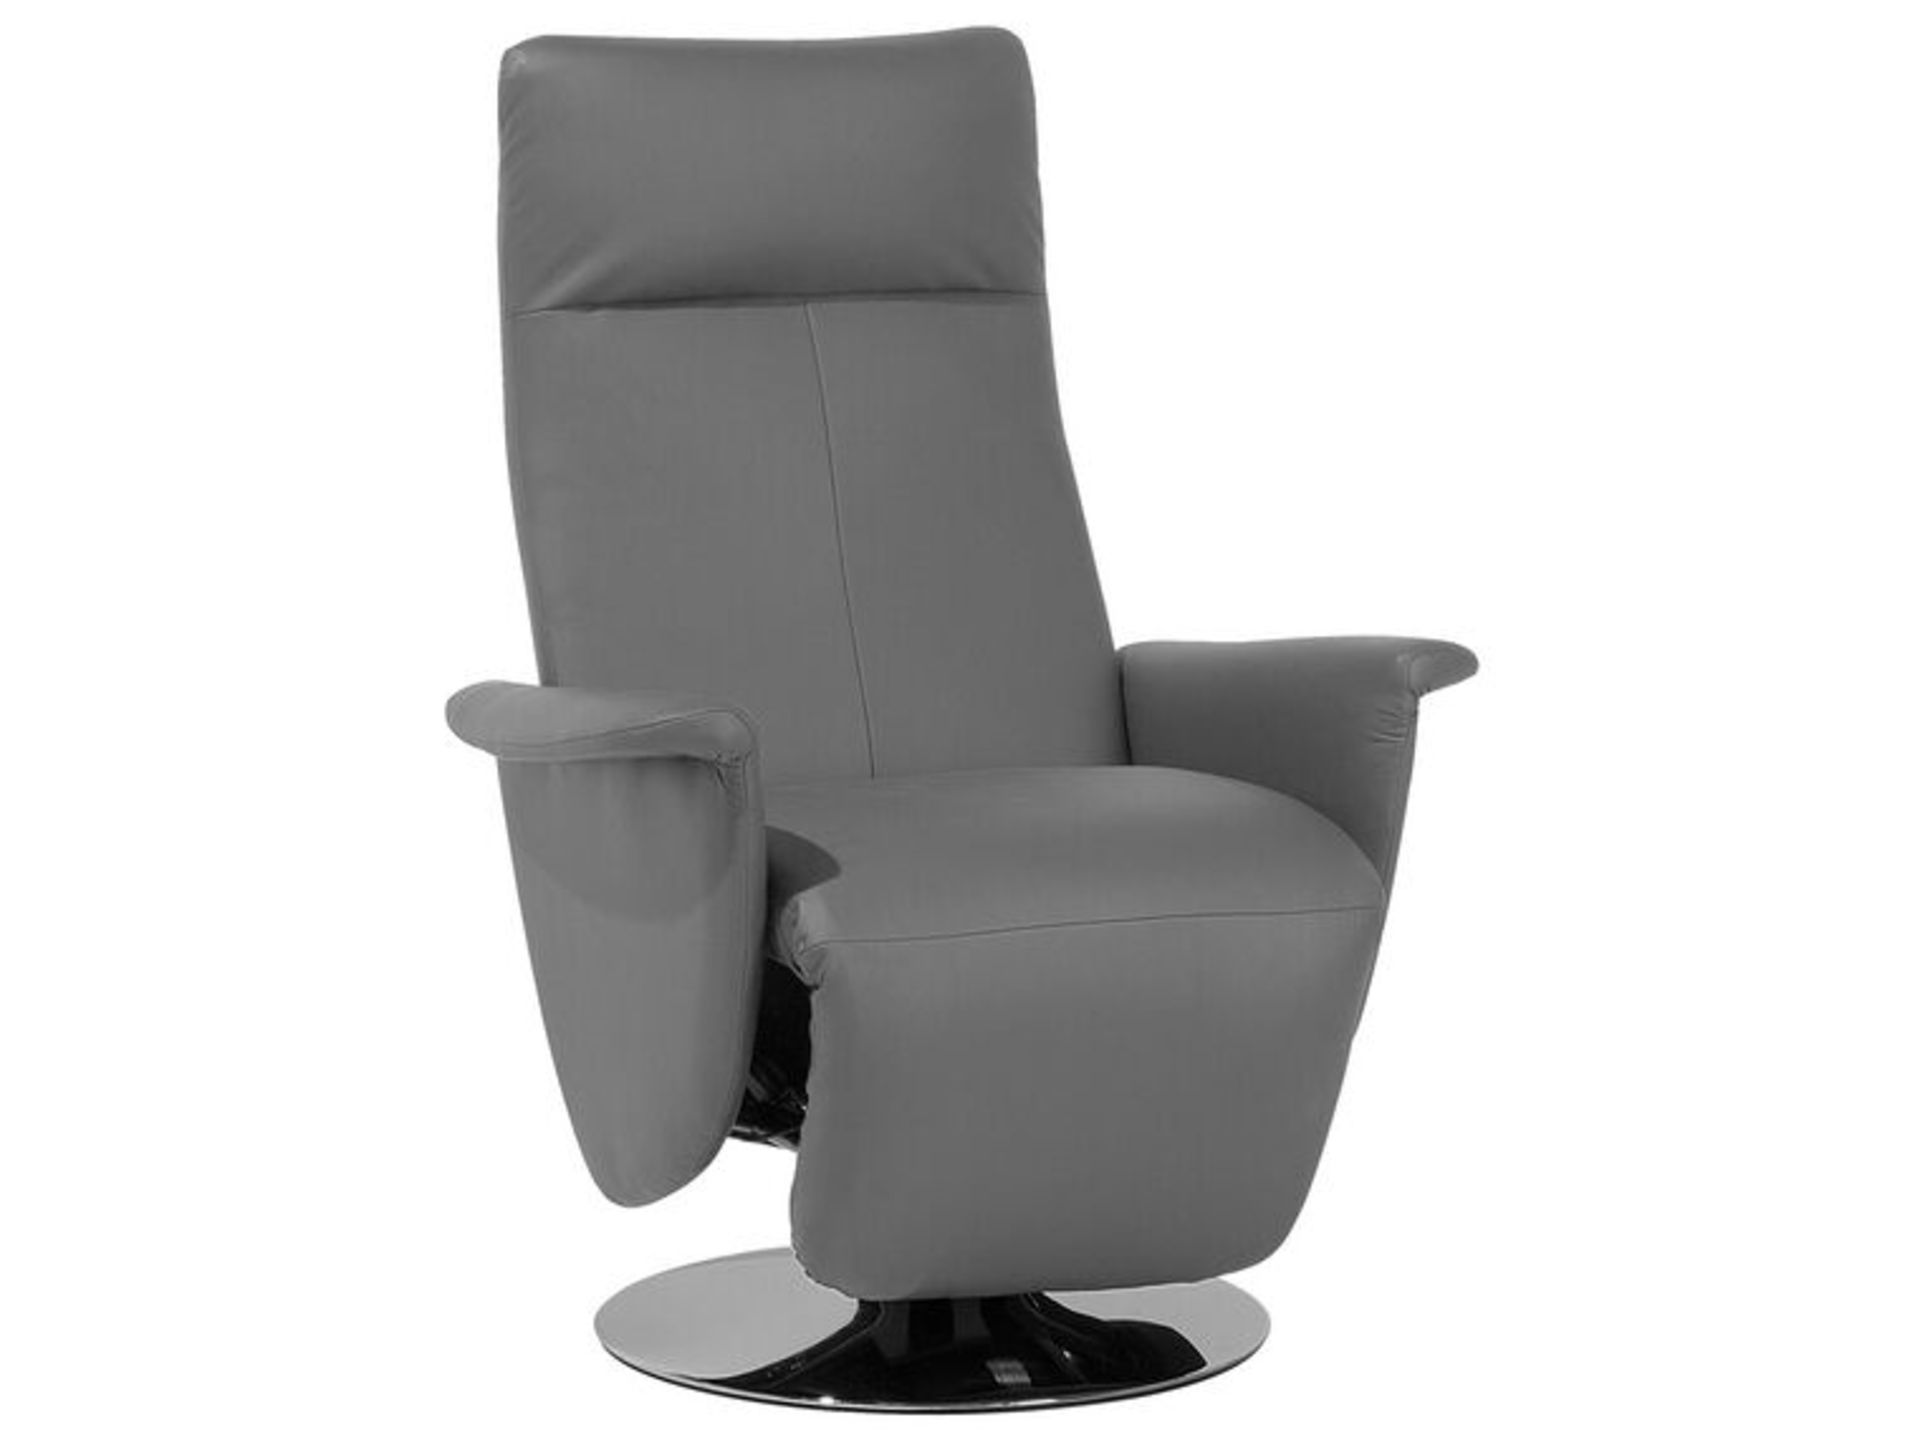 Prime Faux Leather Recliner Chair Grey. - SR6. RRP £599.99. This elegant reclining chair is a